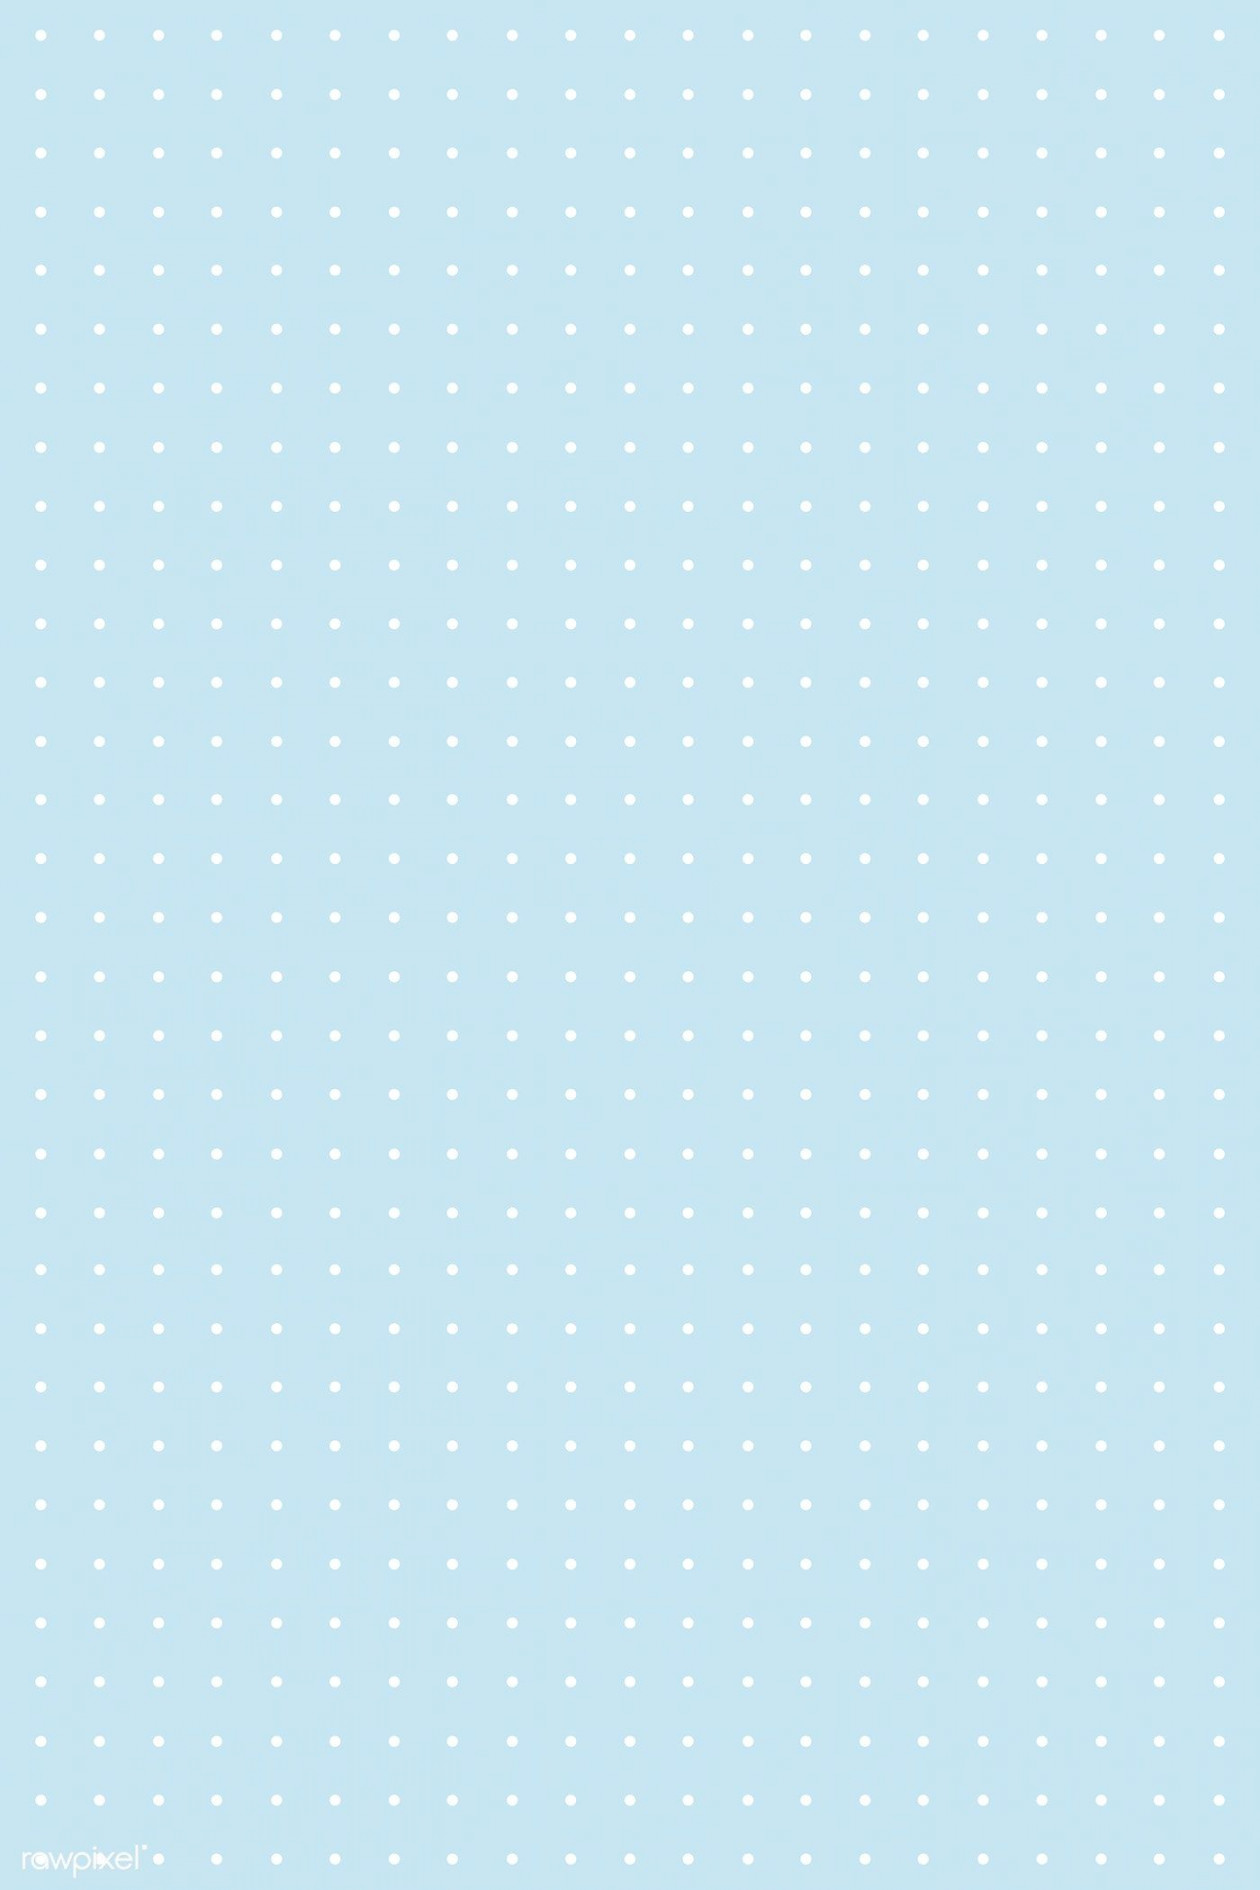 Blank blue notepaper design vector  free image by rawpixel